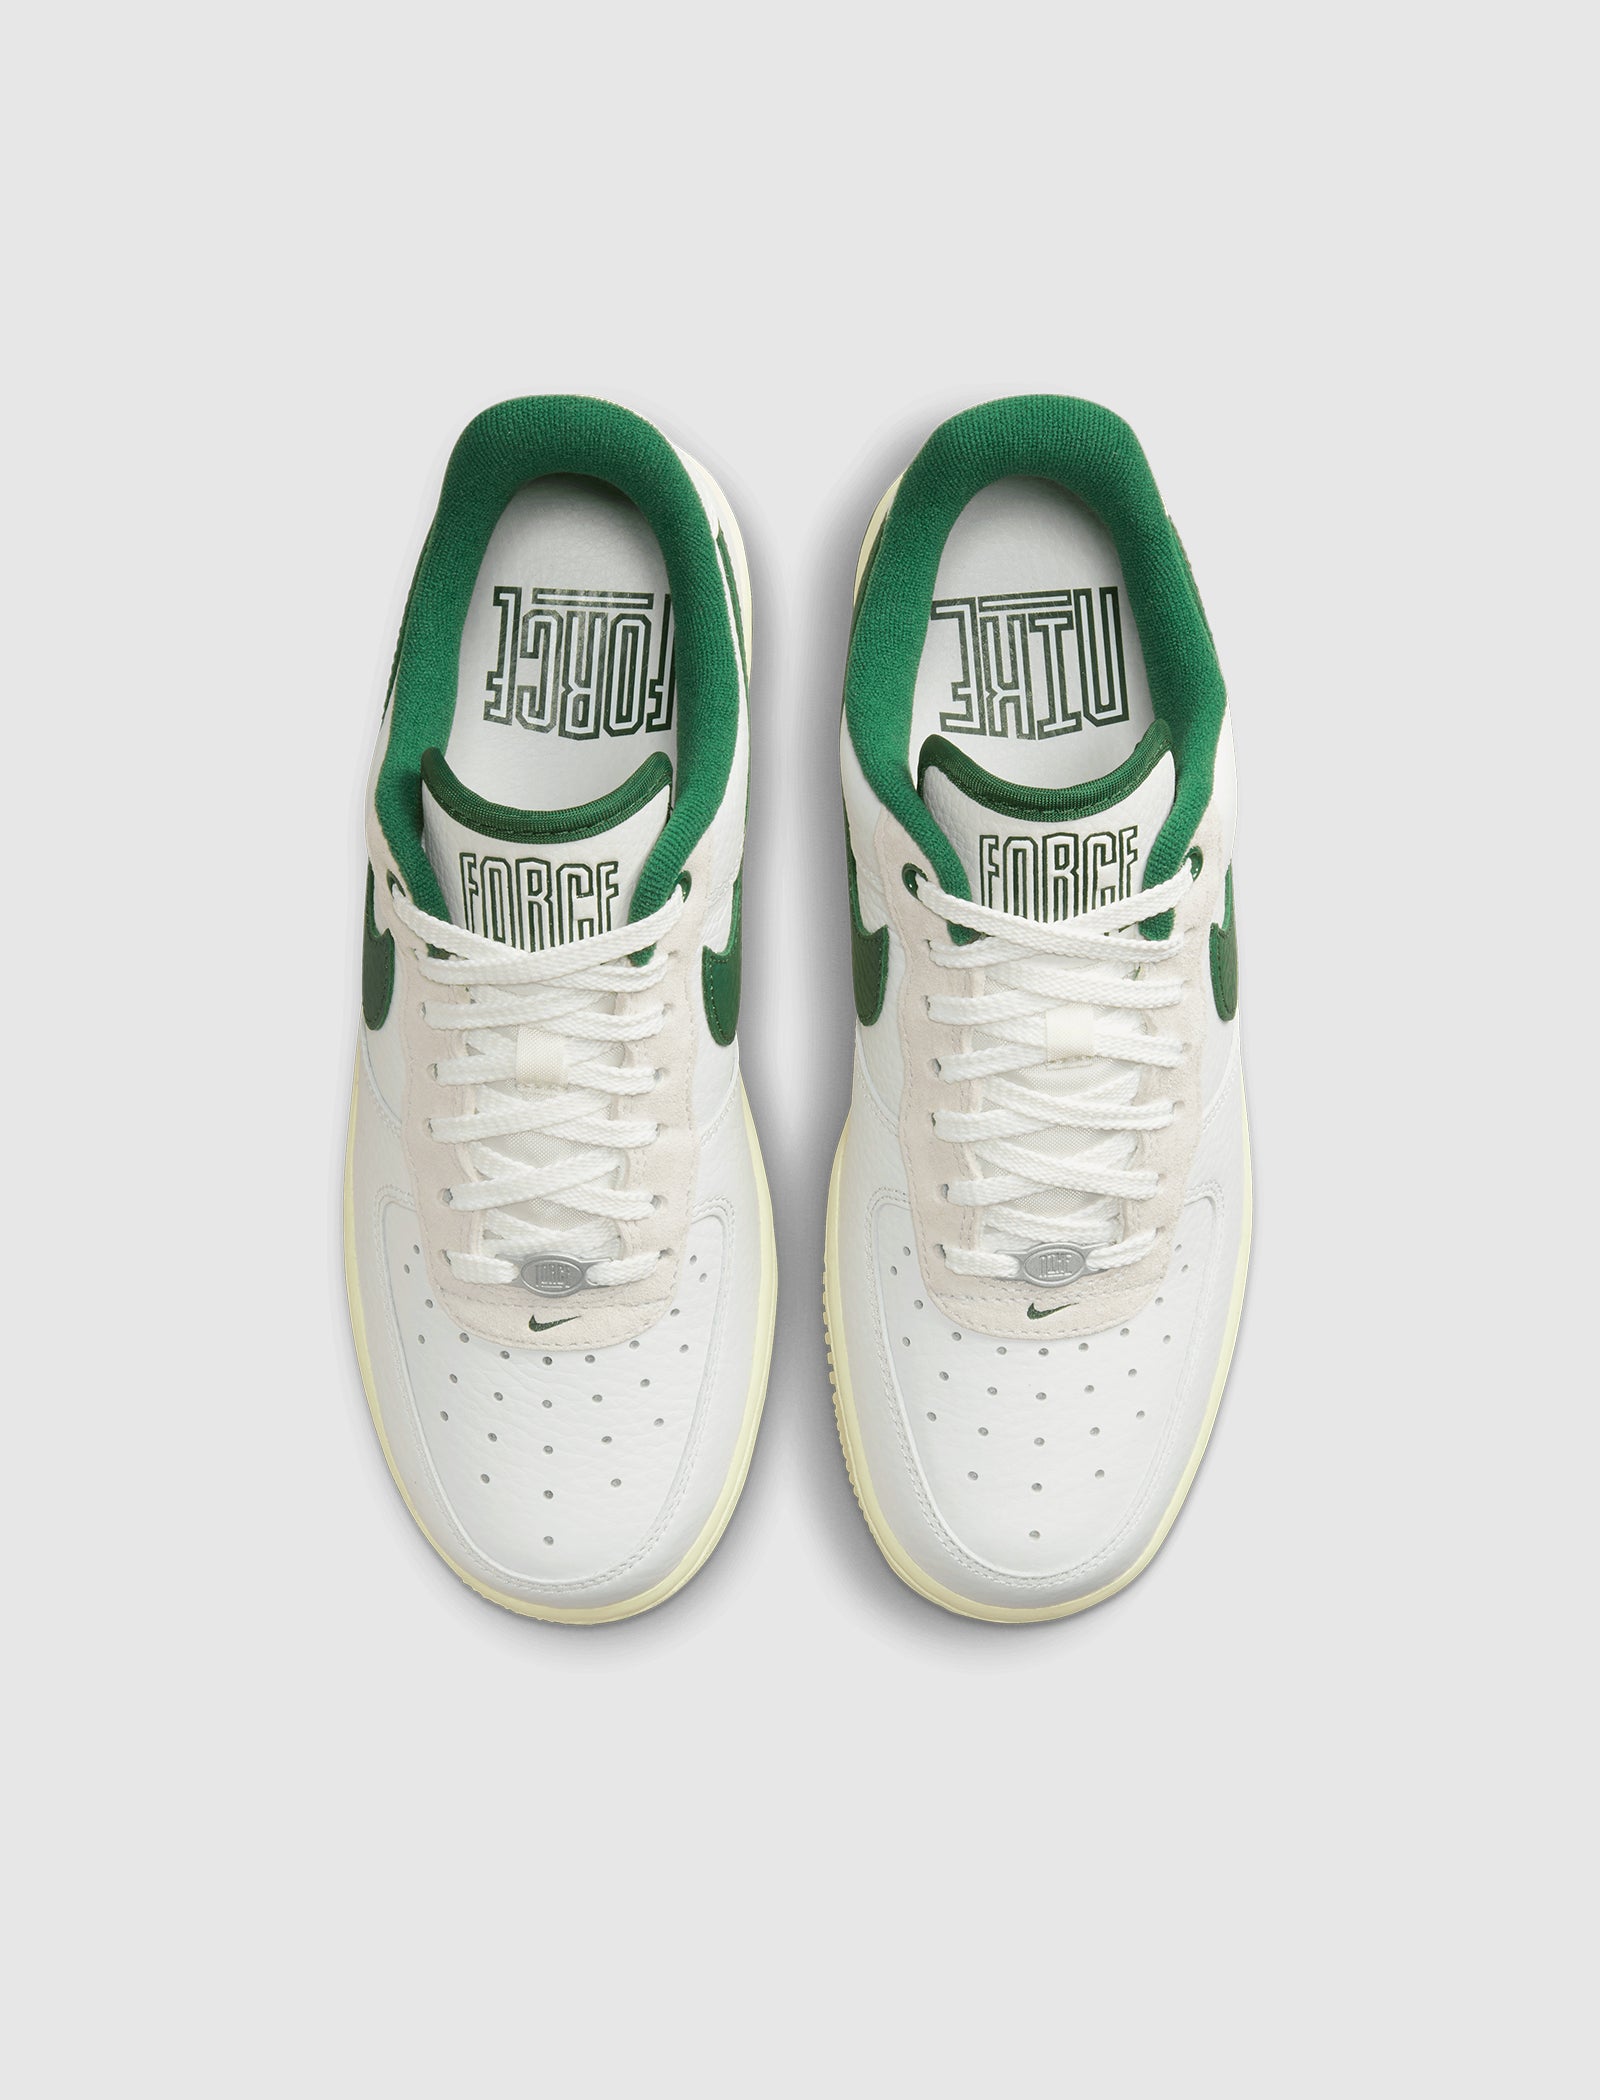 WOMEN'S AIR FORCE 1 '07 LX COMMAND FORCE "GORGE GREEN"